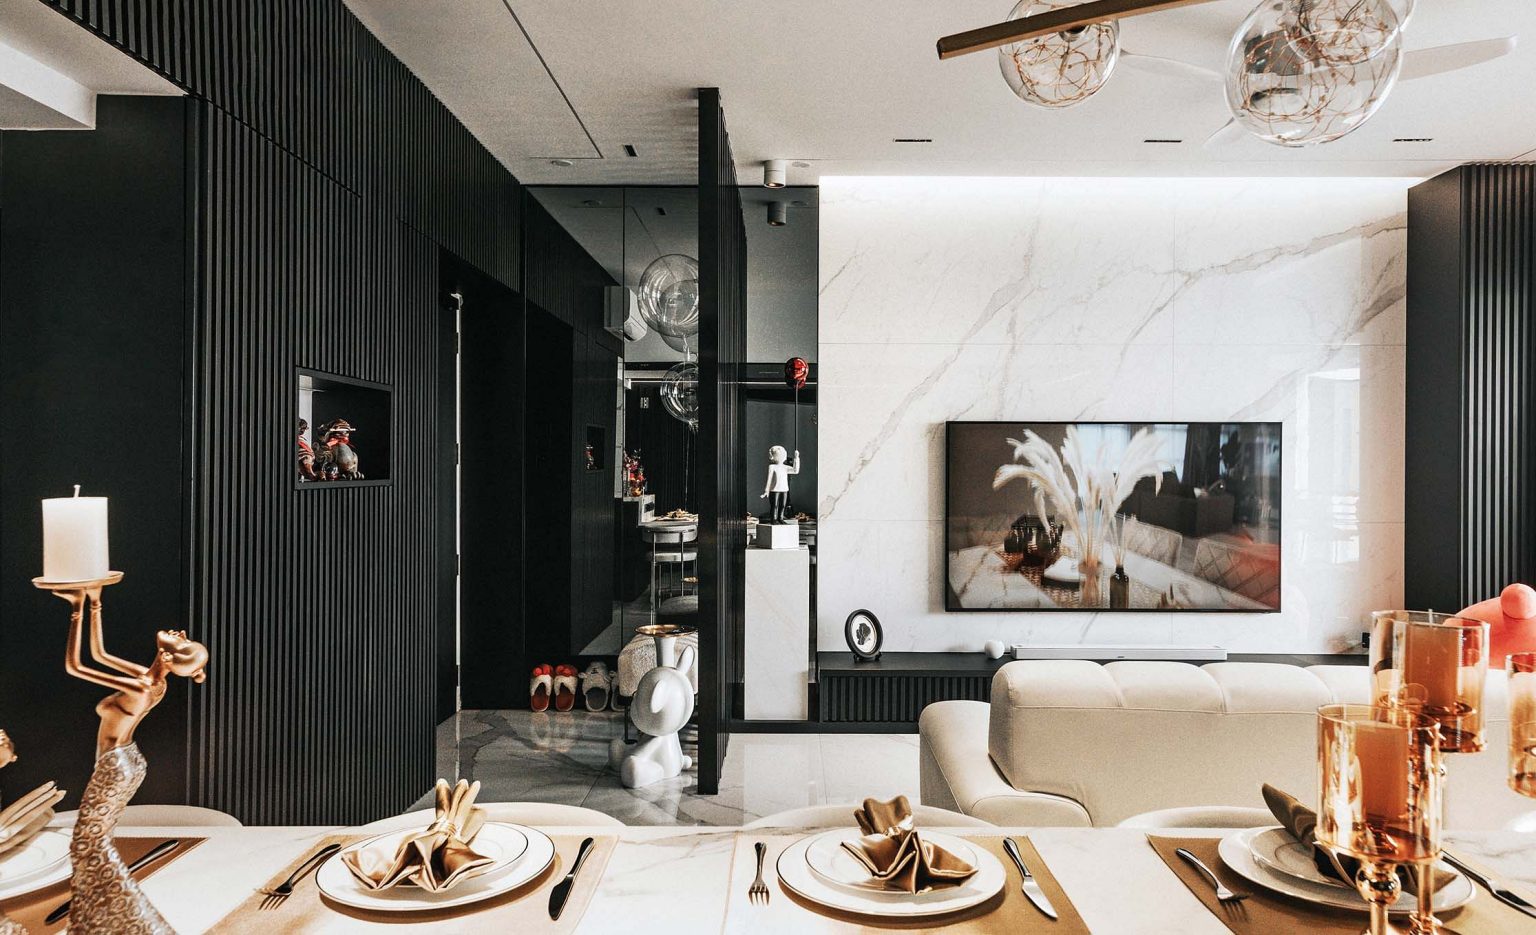 Marble TV wall and black and gold accents contribute to a modern luxury look